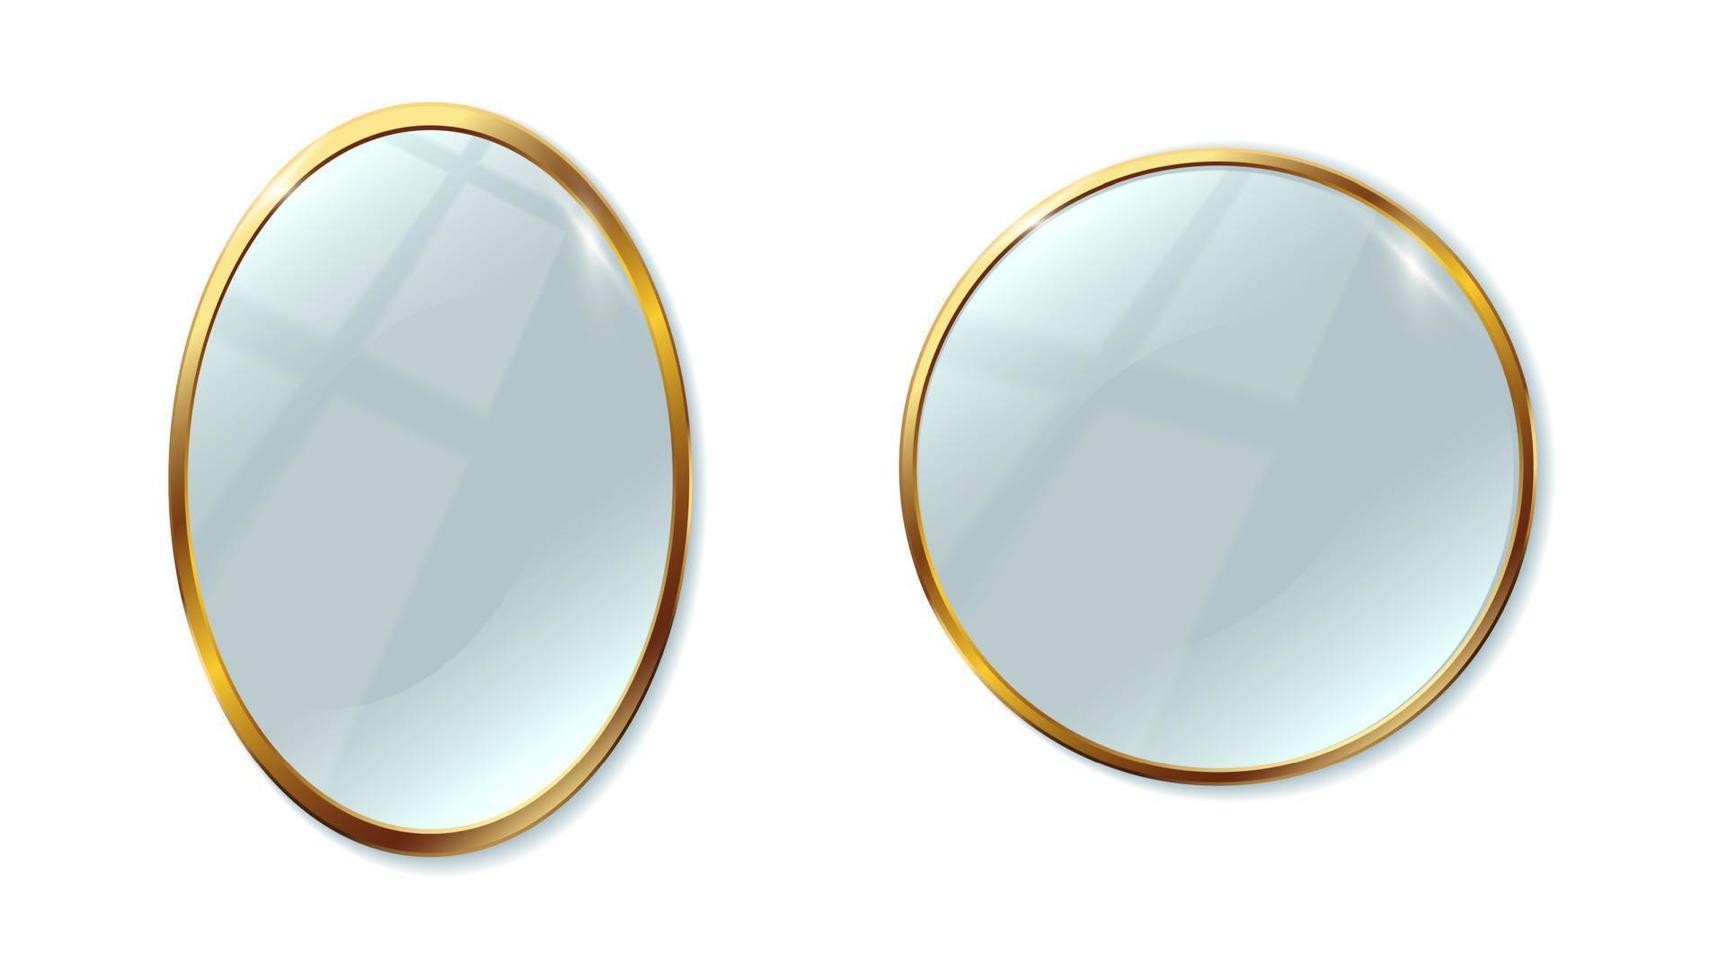 3d realistic vector icon set. Two mirrors with gold frame oval and round. Isolated on white background.